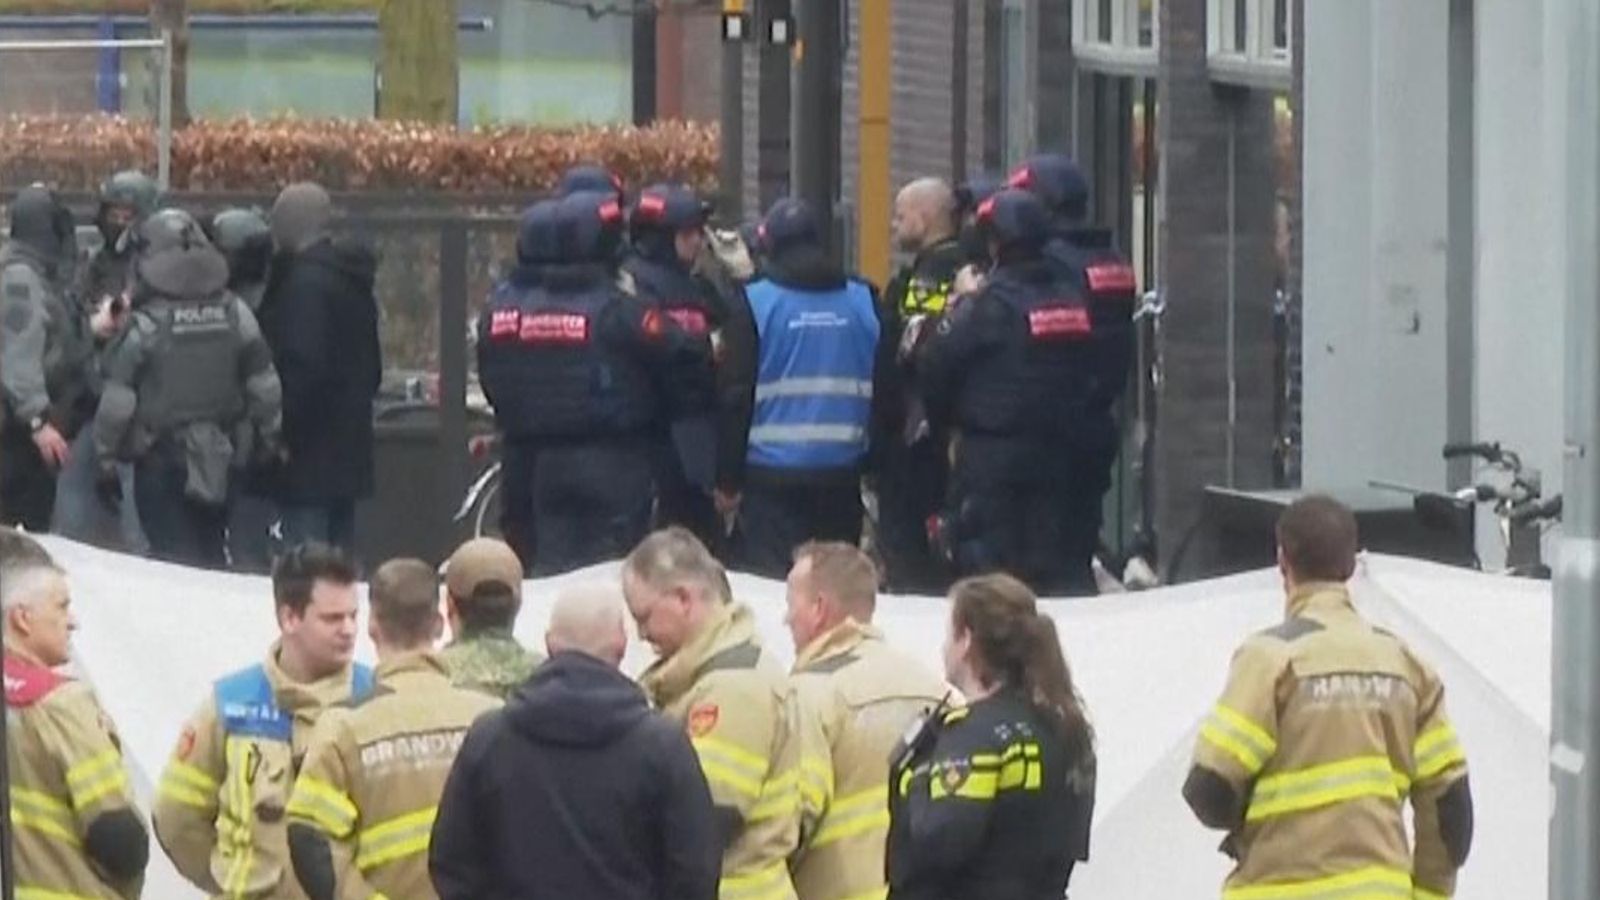 Netherlands: Man 'armed with explosives' takes hostages in nightclub